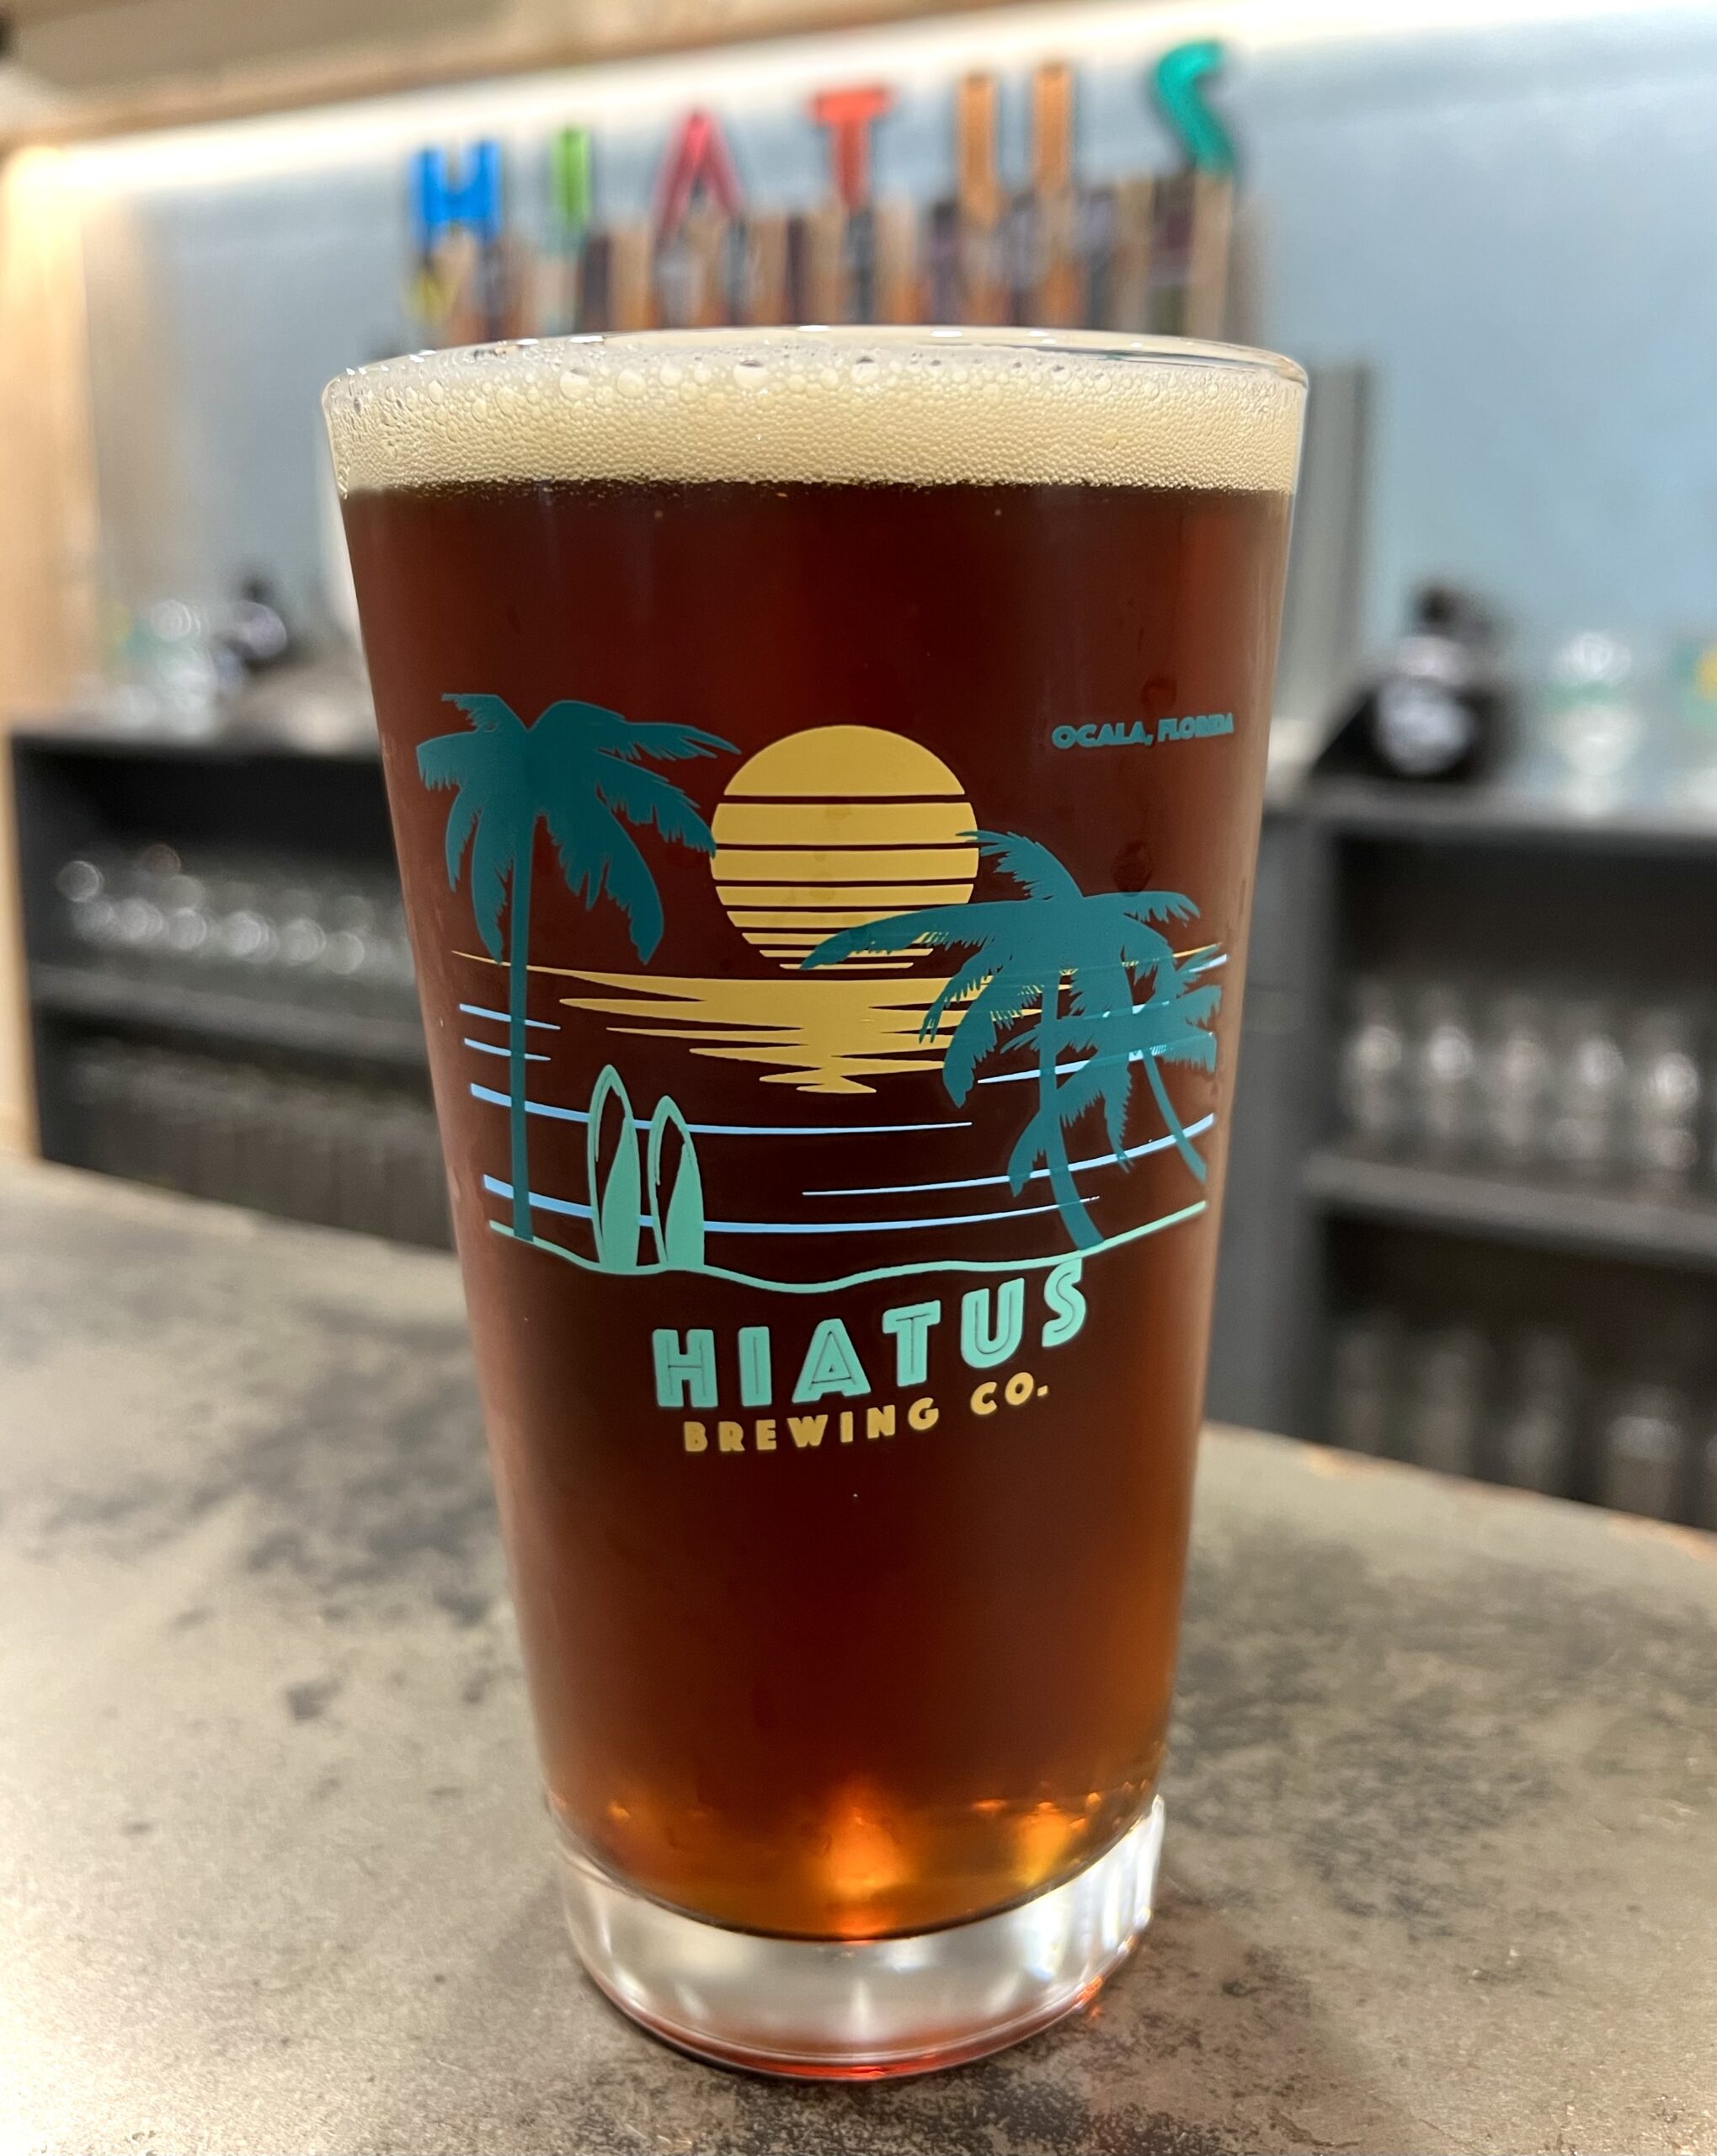 Hiatus Brewing Company Ocala Florida Brewpub Craft Beer Lager Time Stands Still Amber